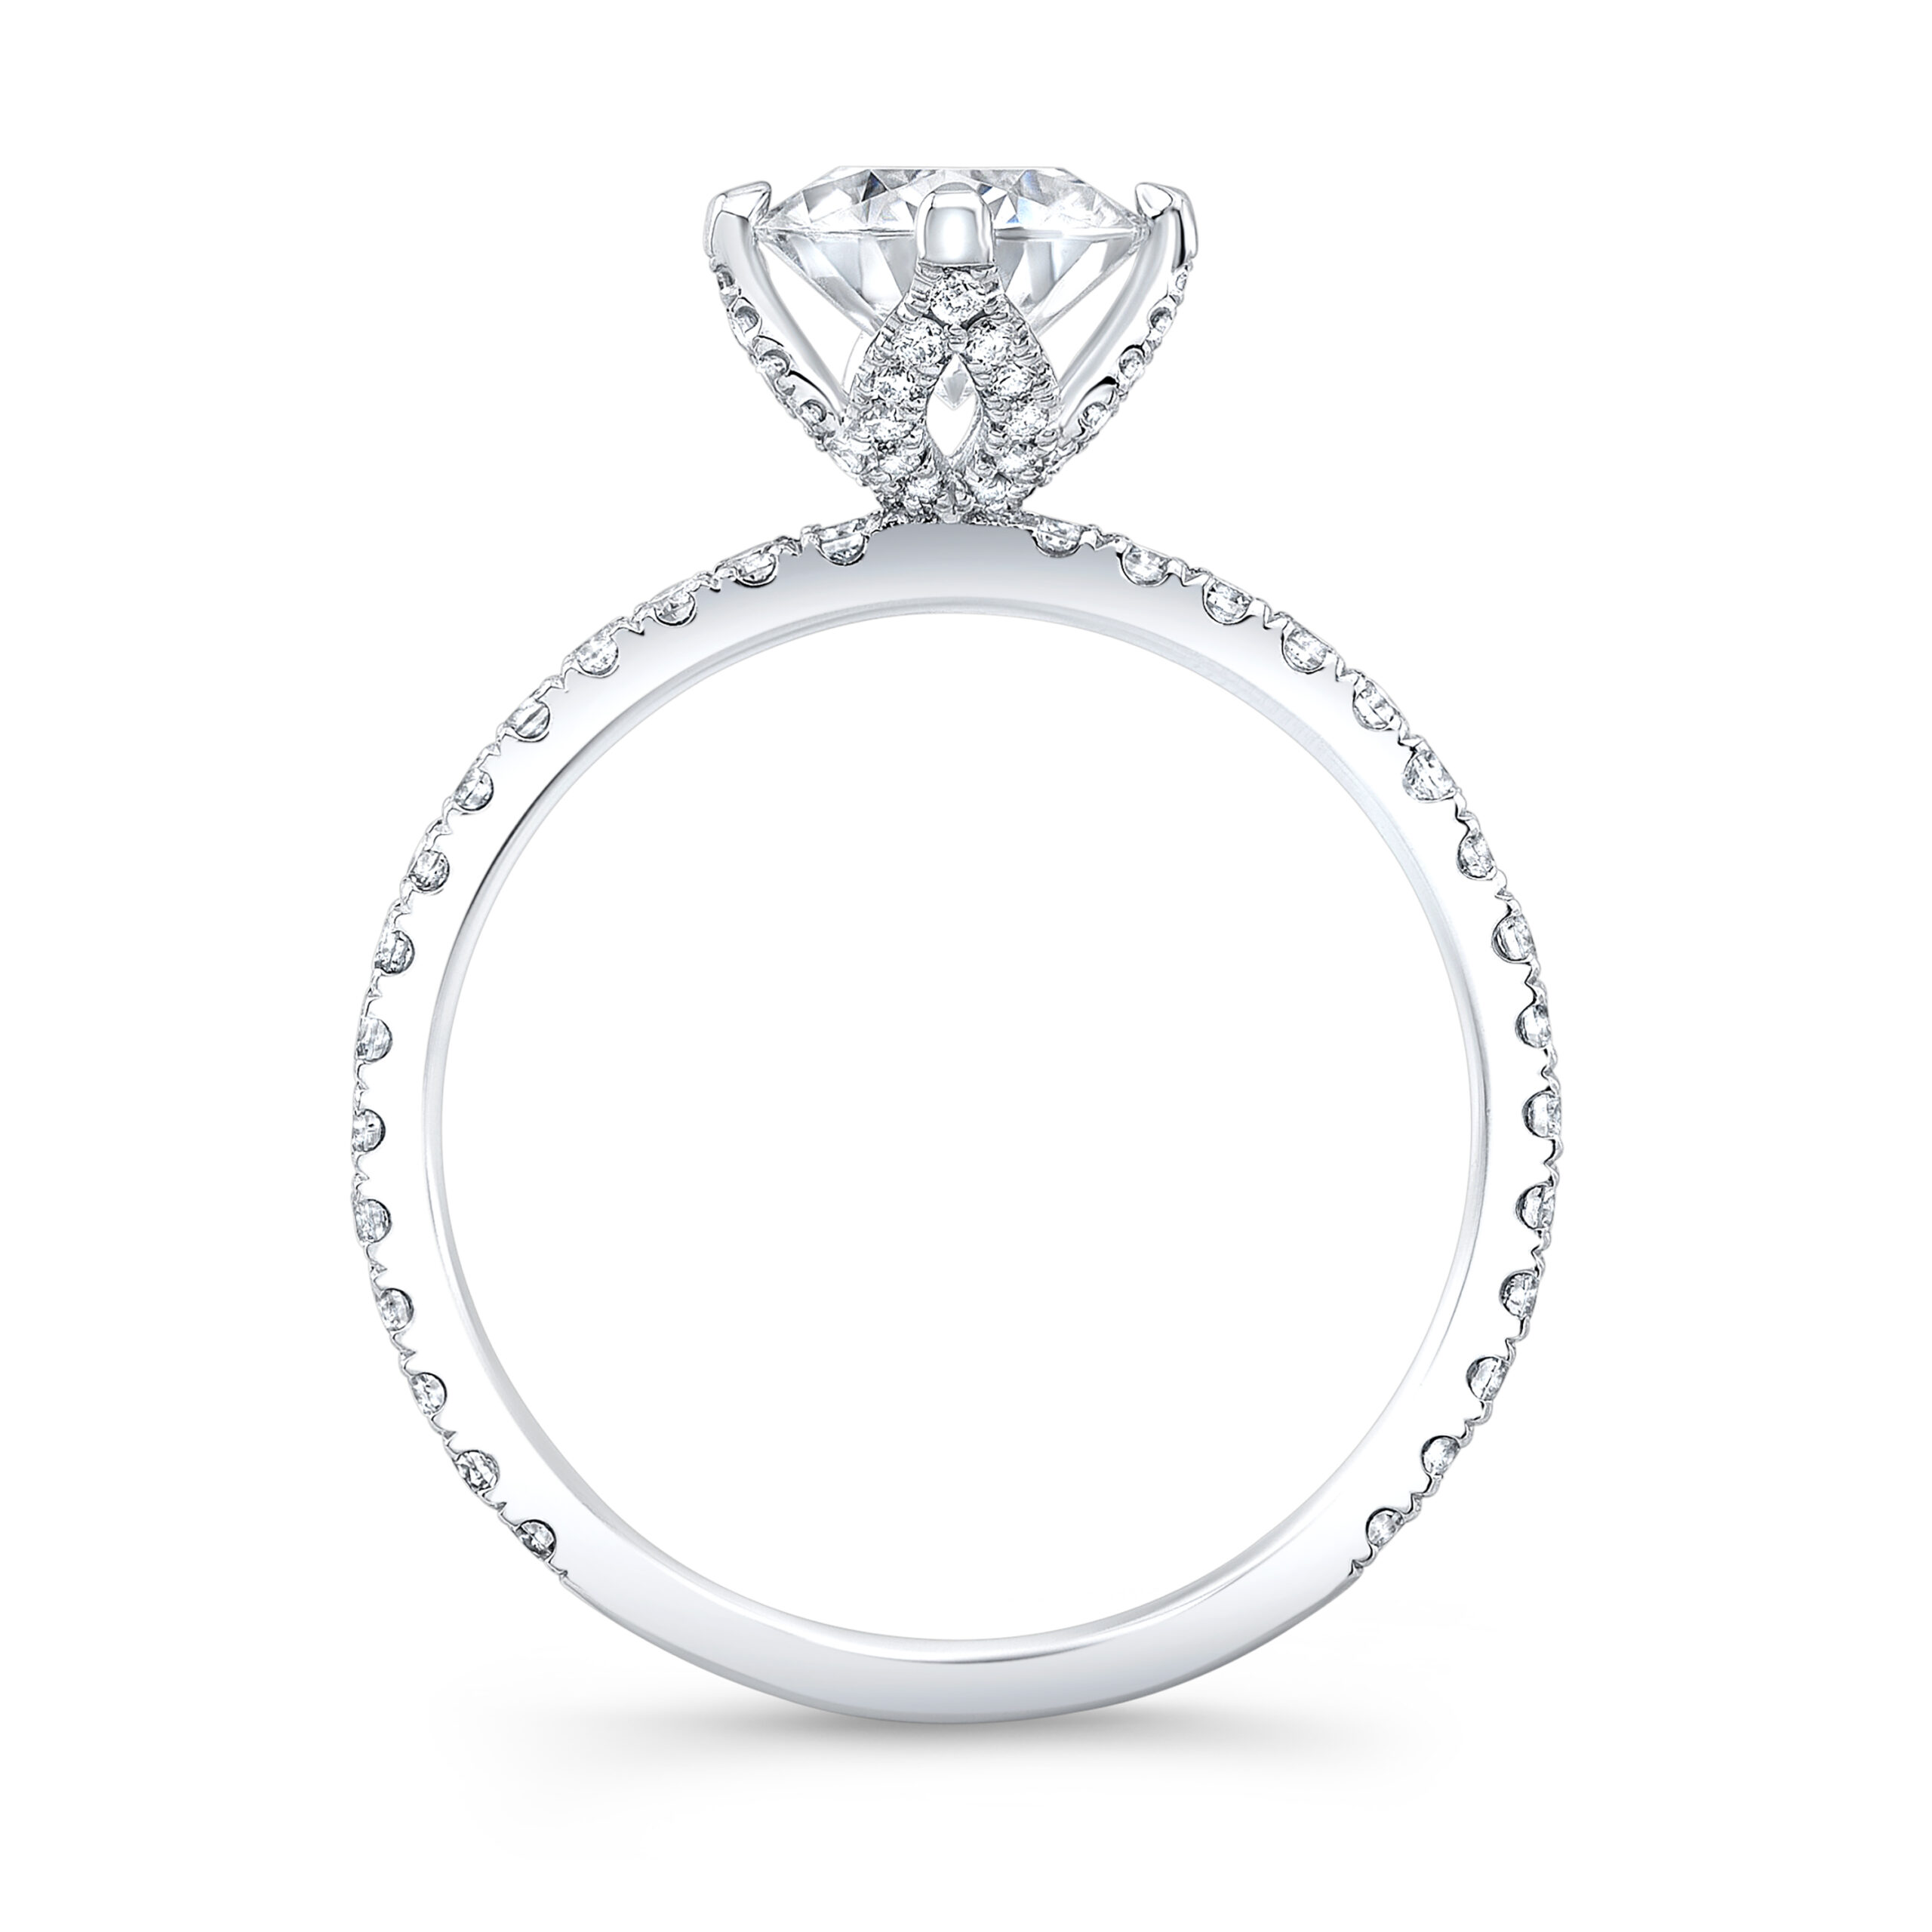 The Lily Moissanite